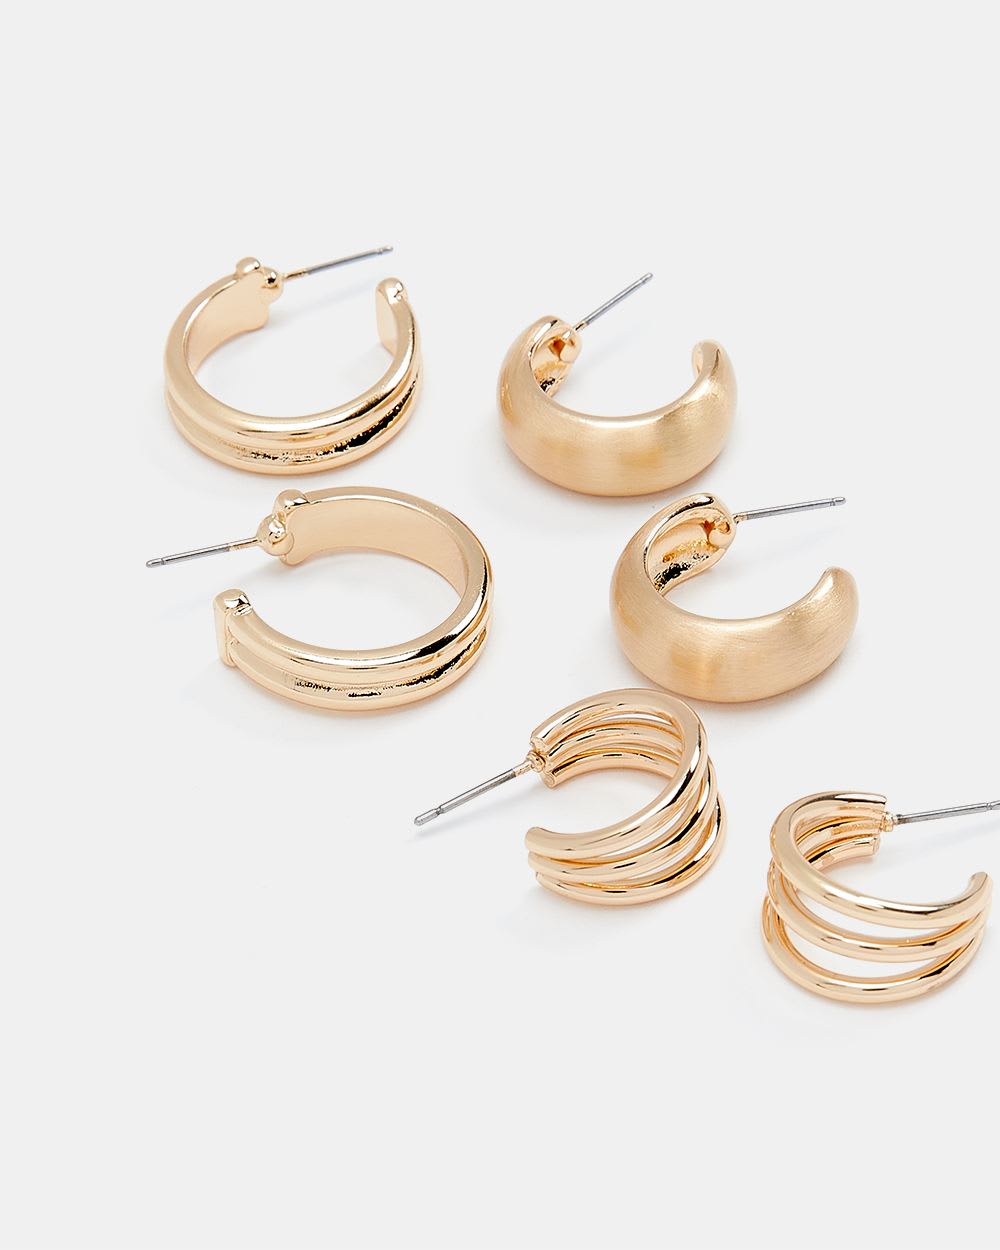 Matte and Shiny Hoops Earrings - 3 Pairs